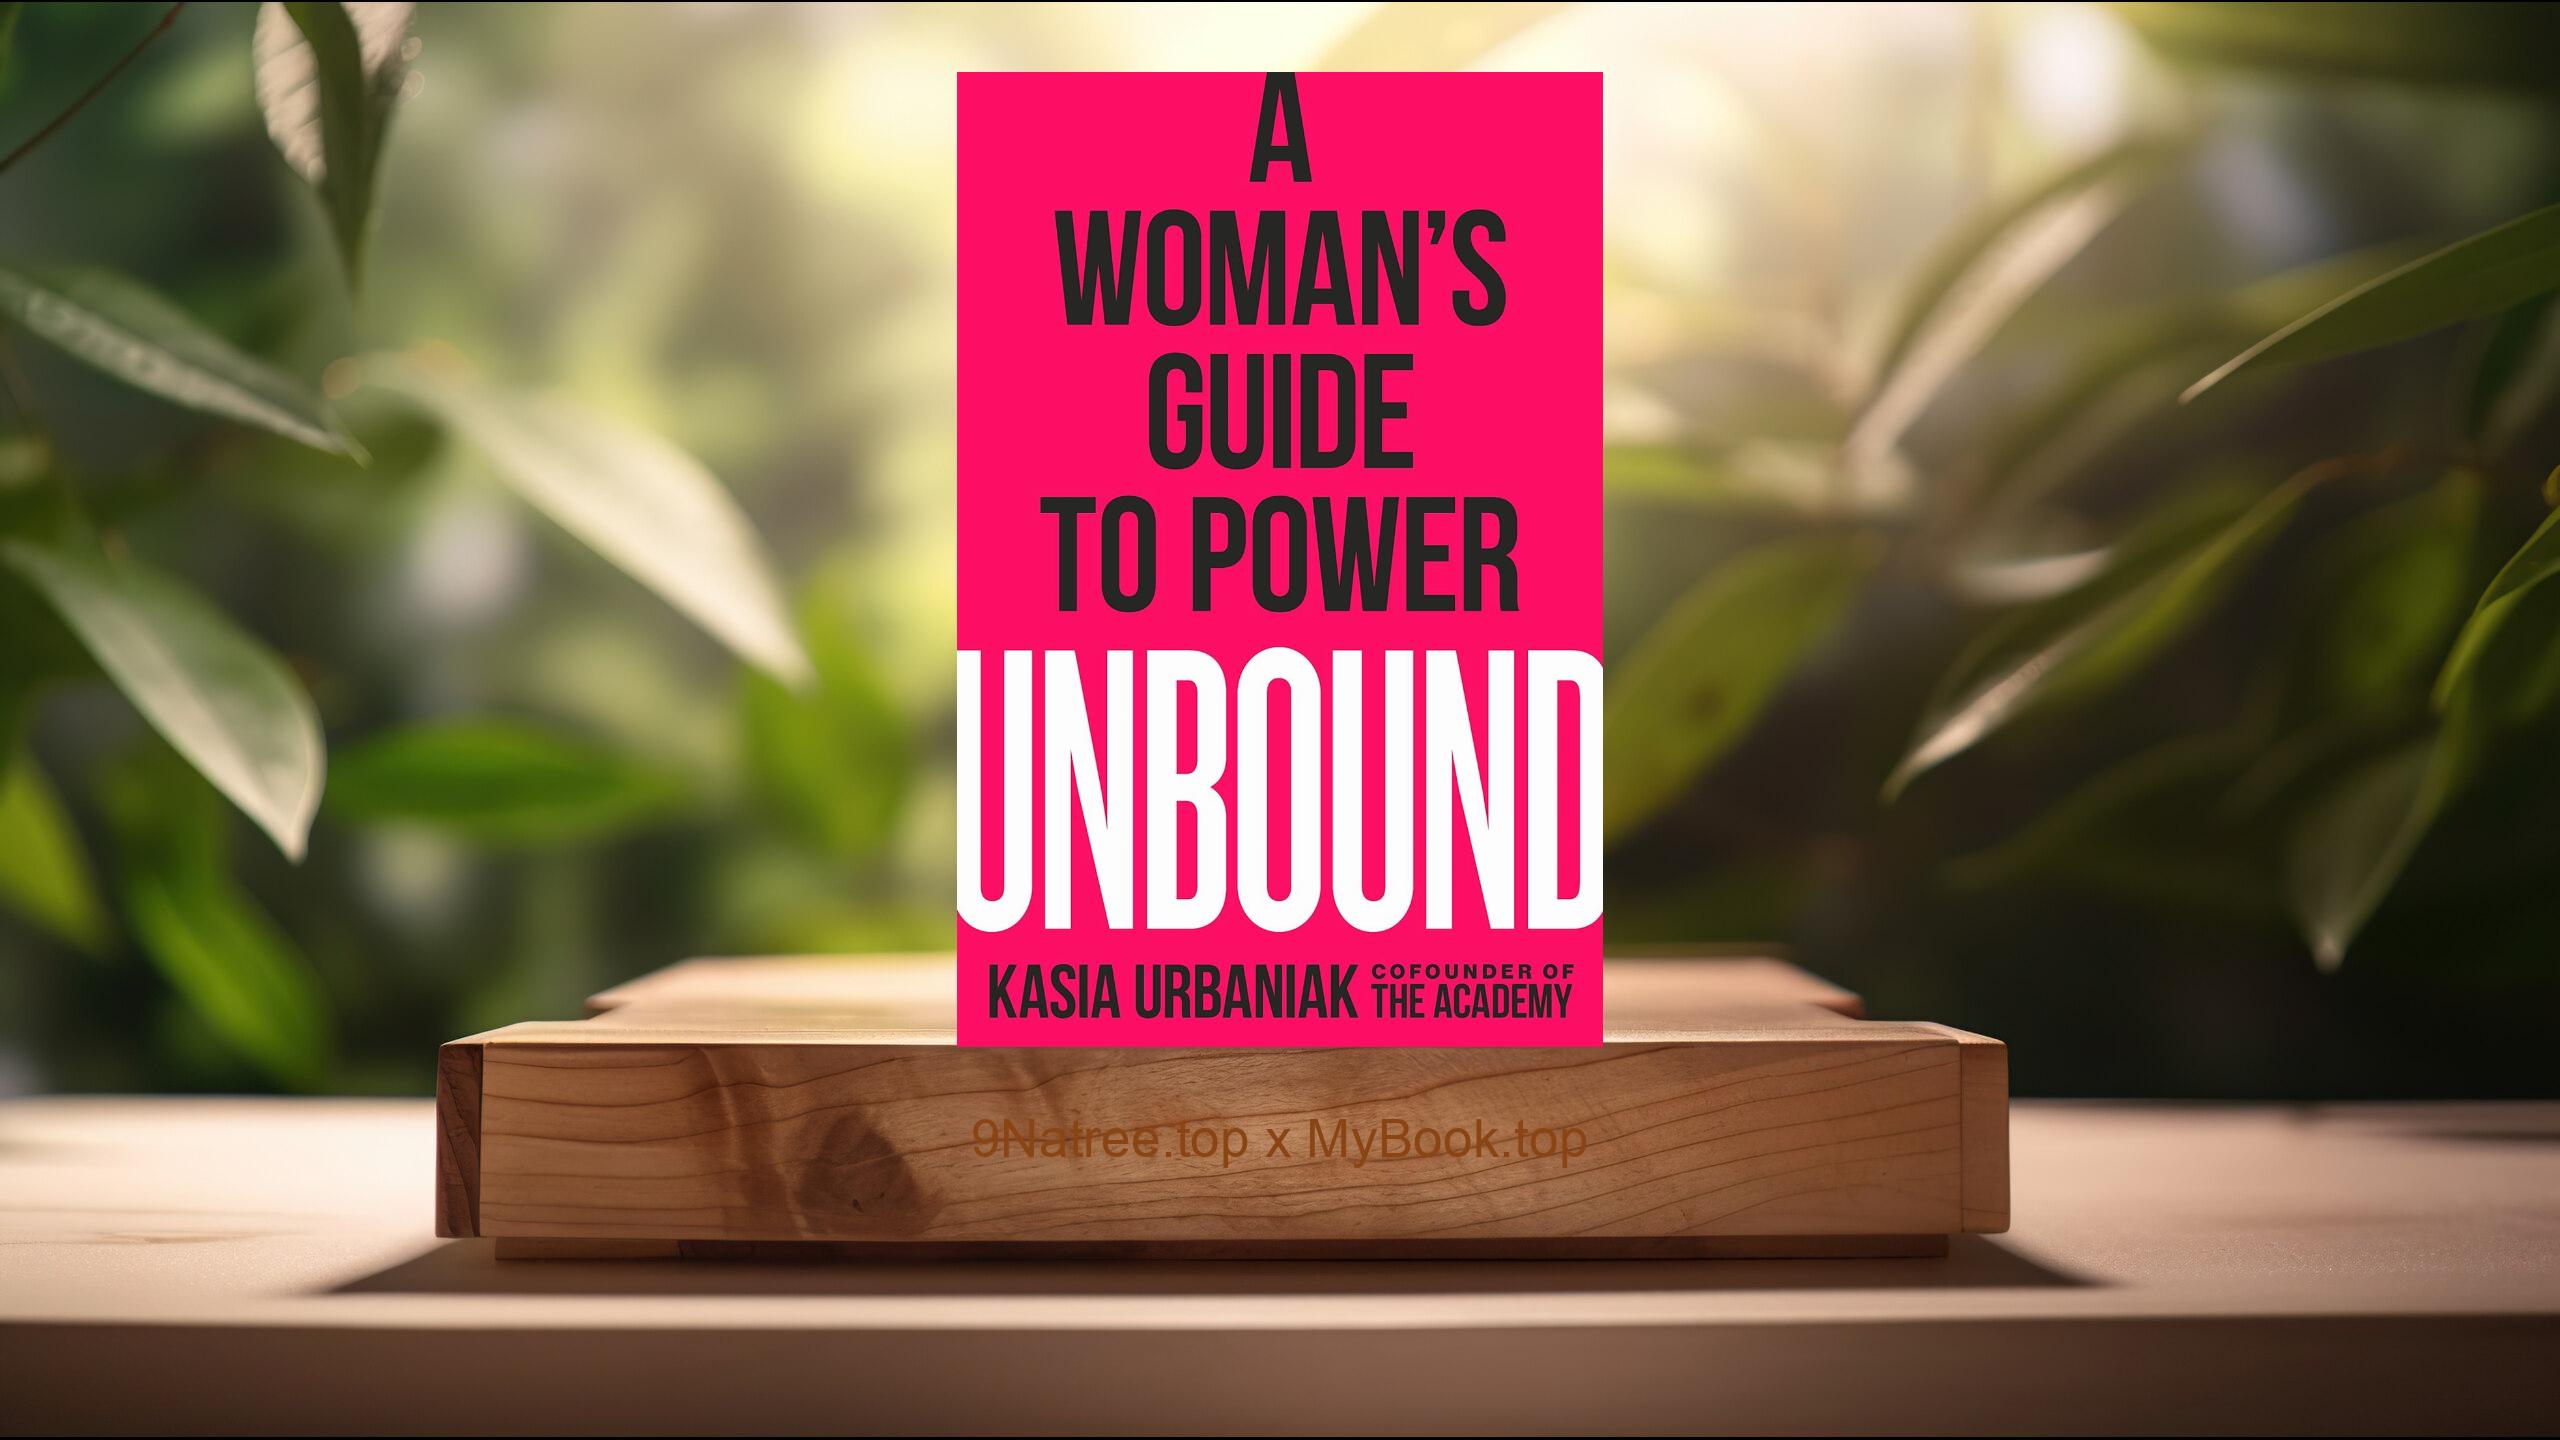 [Review] Unbound: A Woman's Guide to Power (Kasia Urbaniak) Summarized